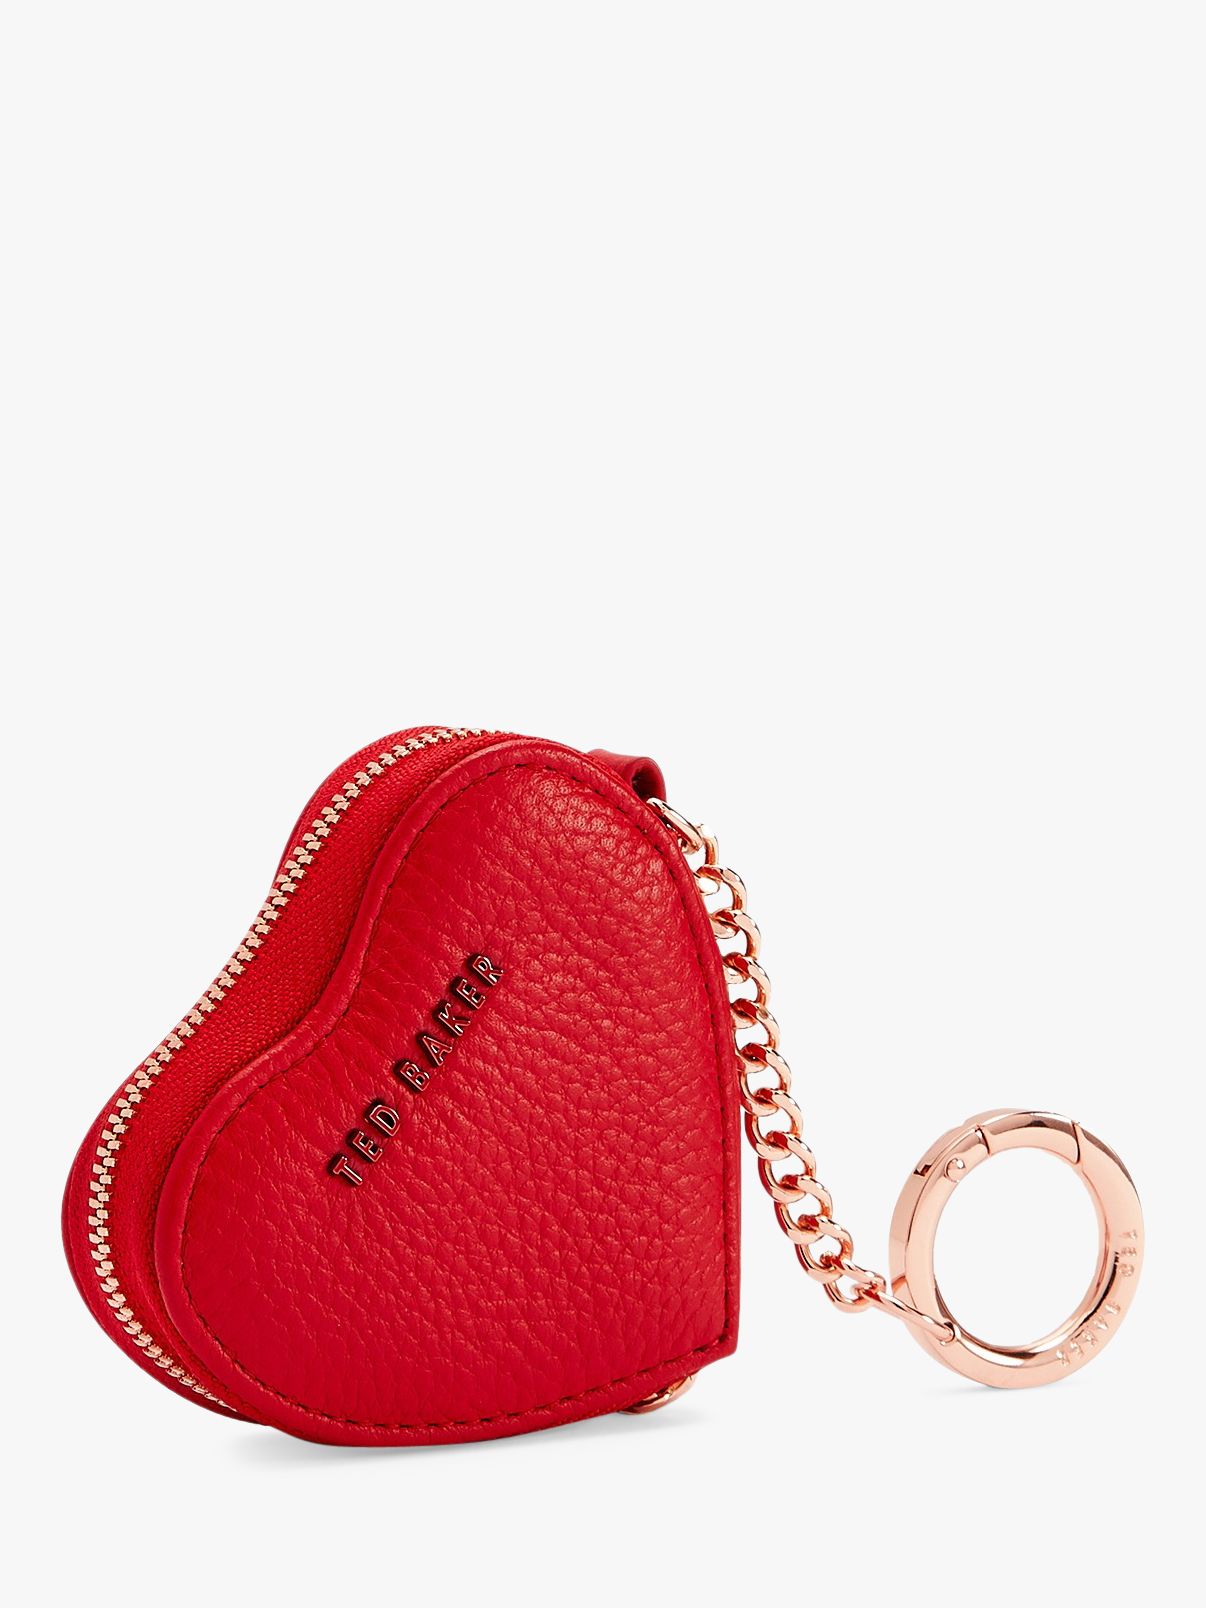 Personalised Leather Coin Purse Women / Red White Love Heart 